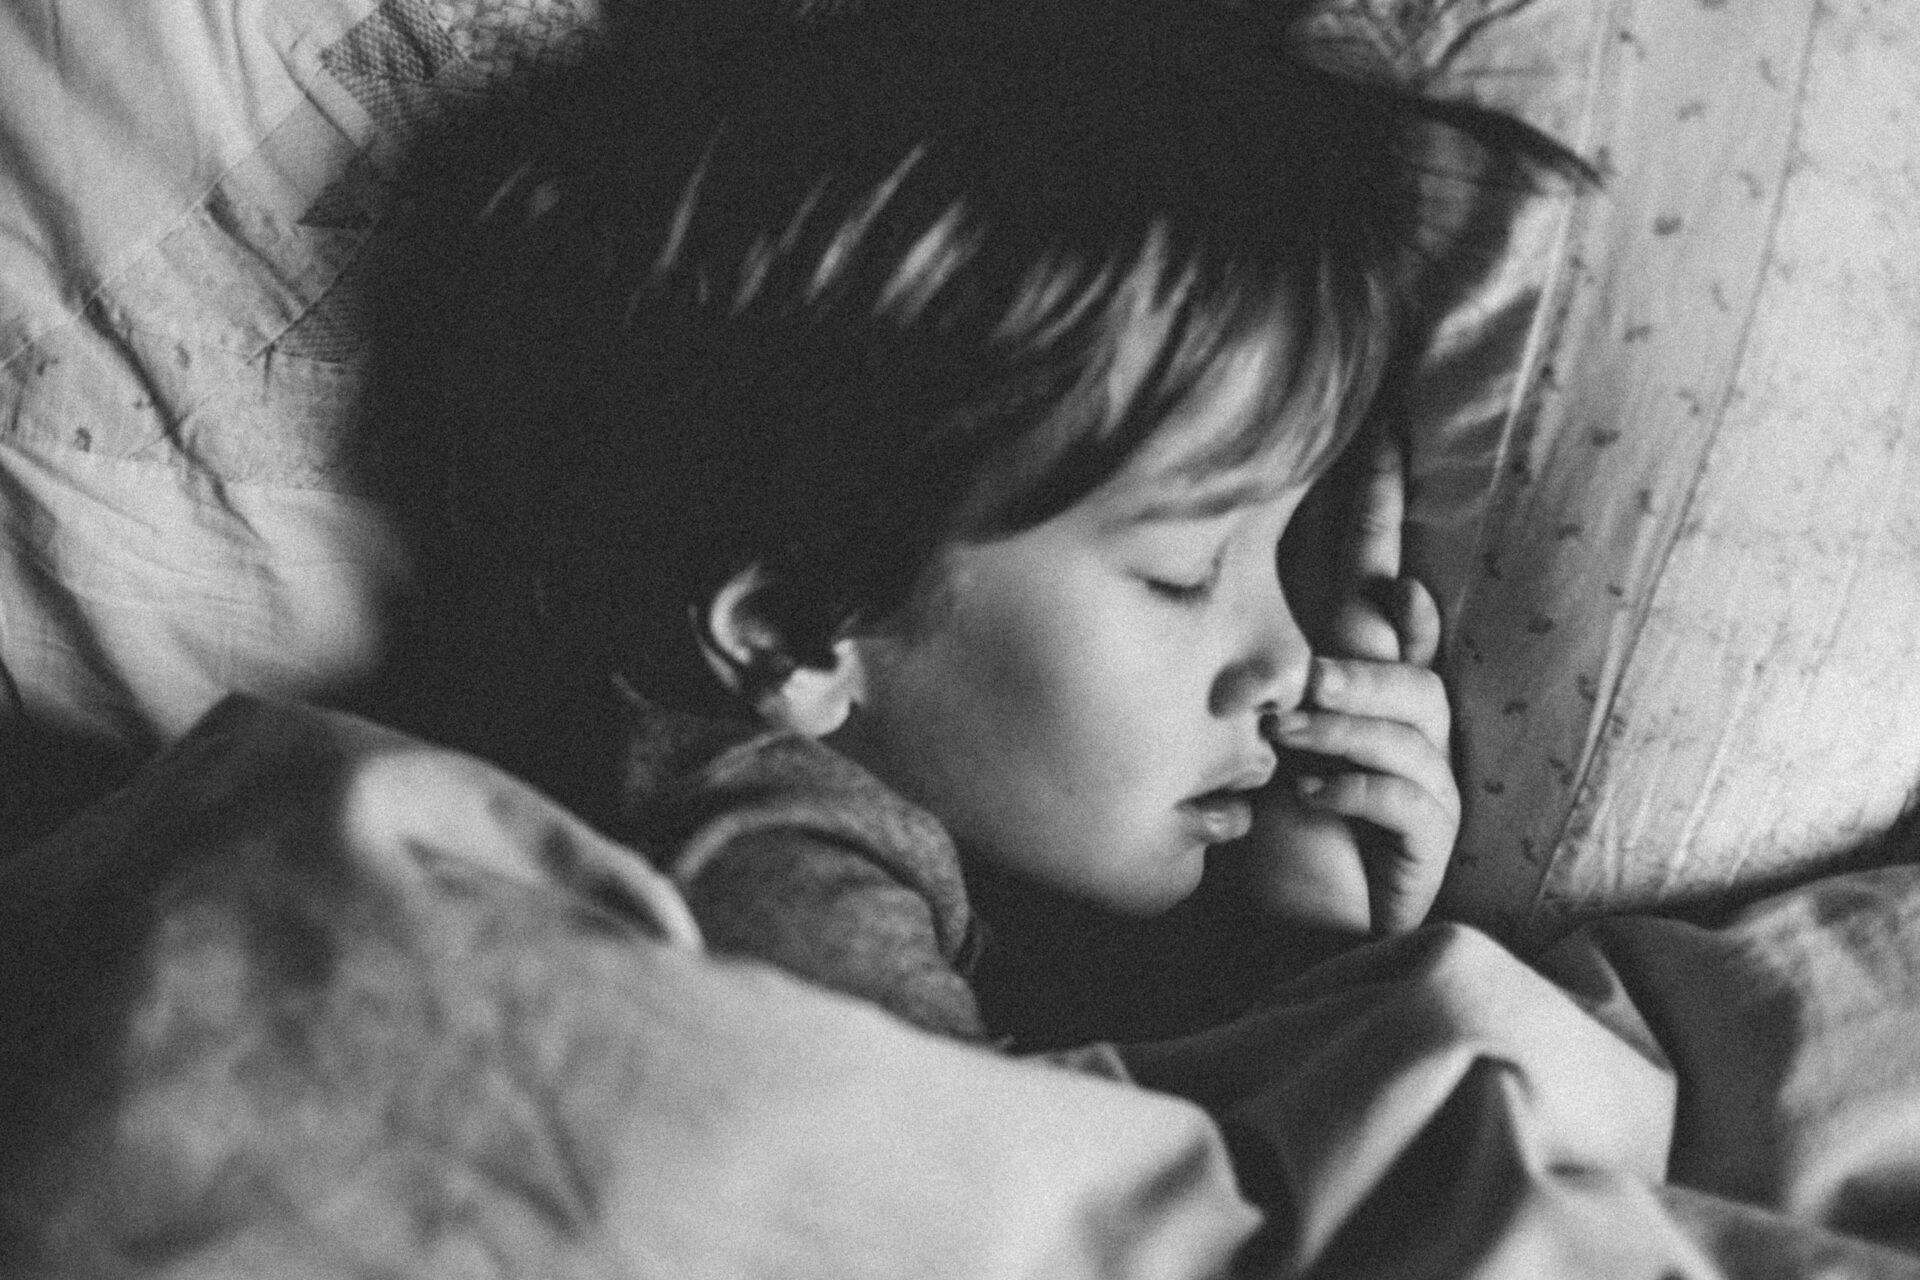 Child sleeping - early learning